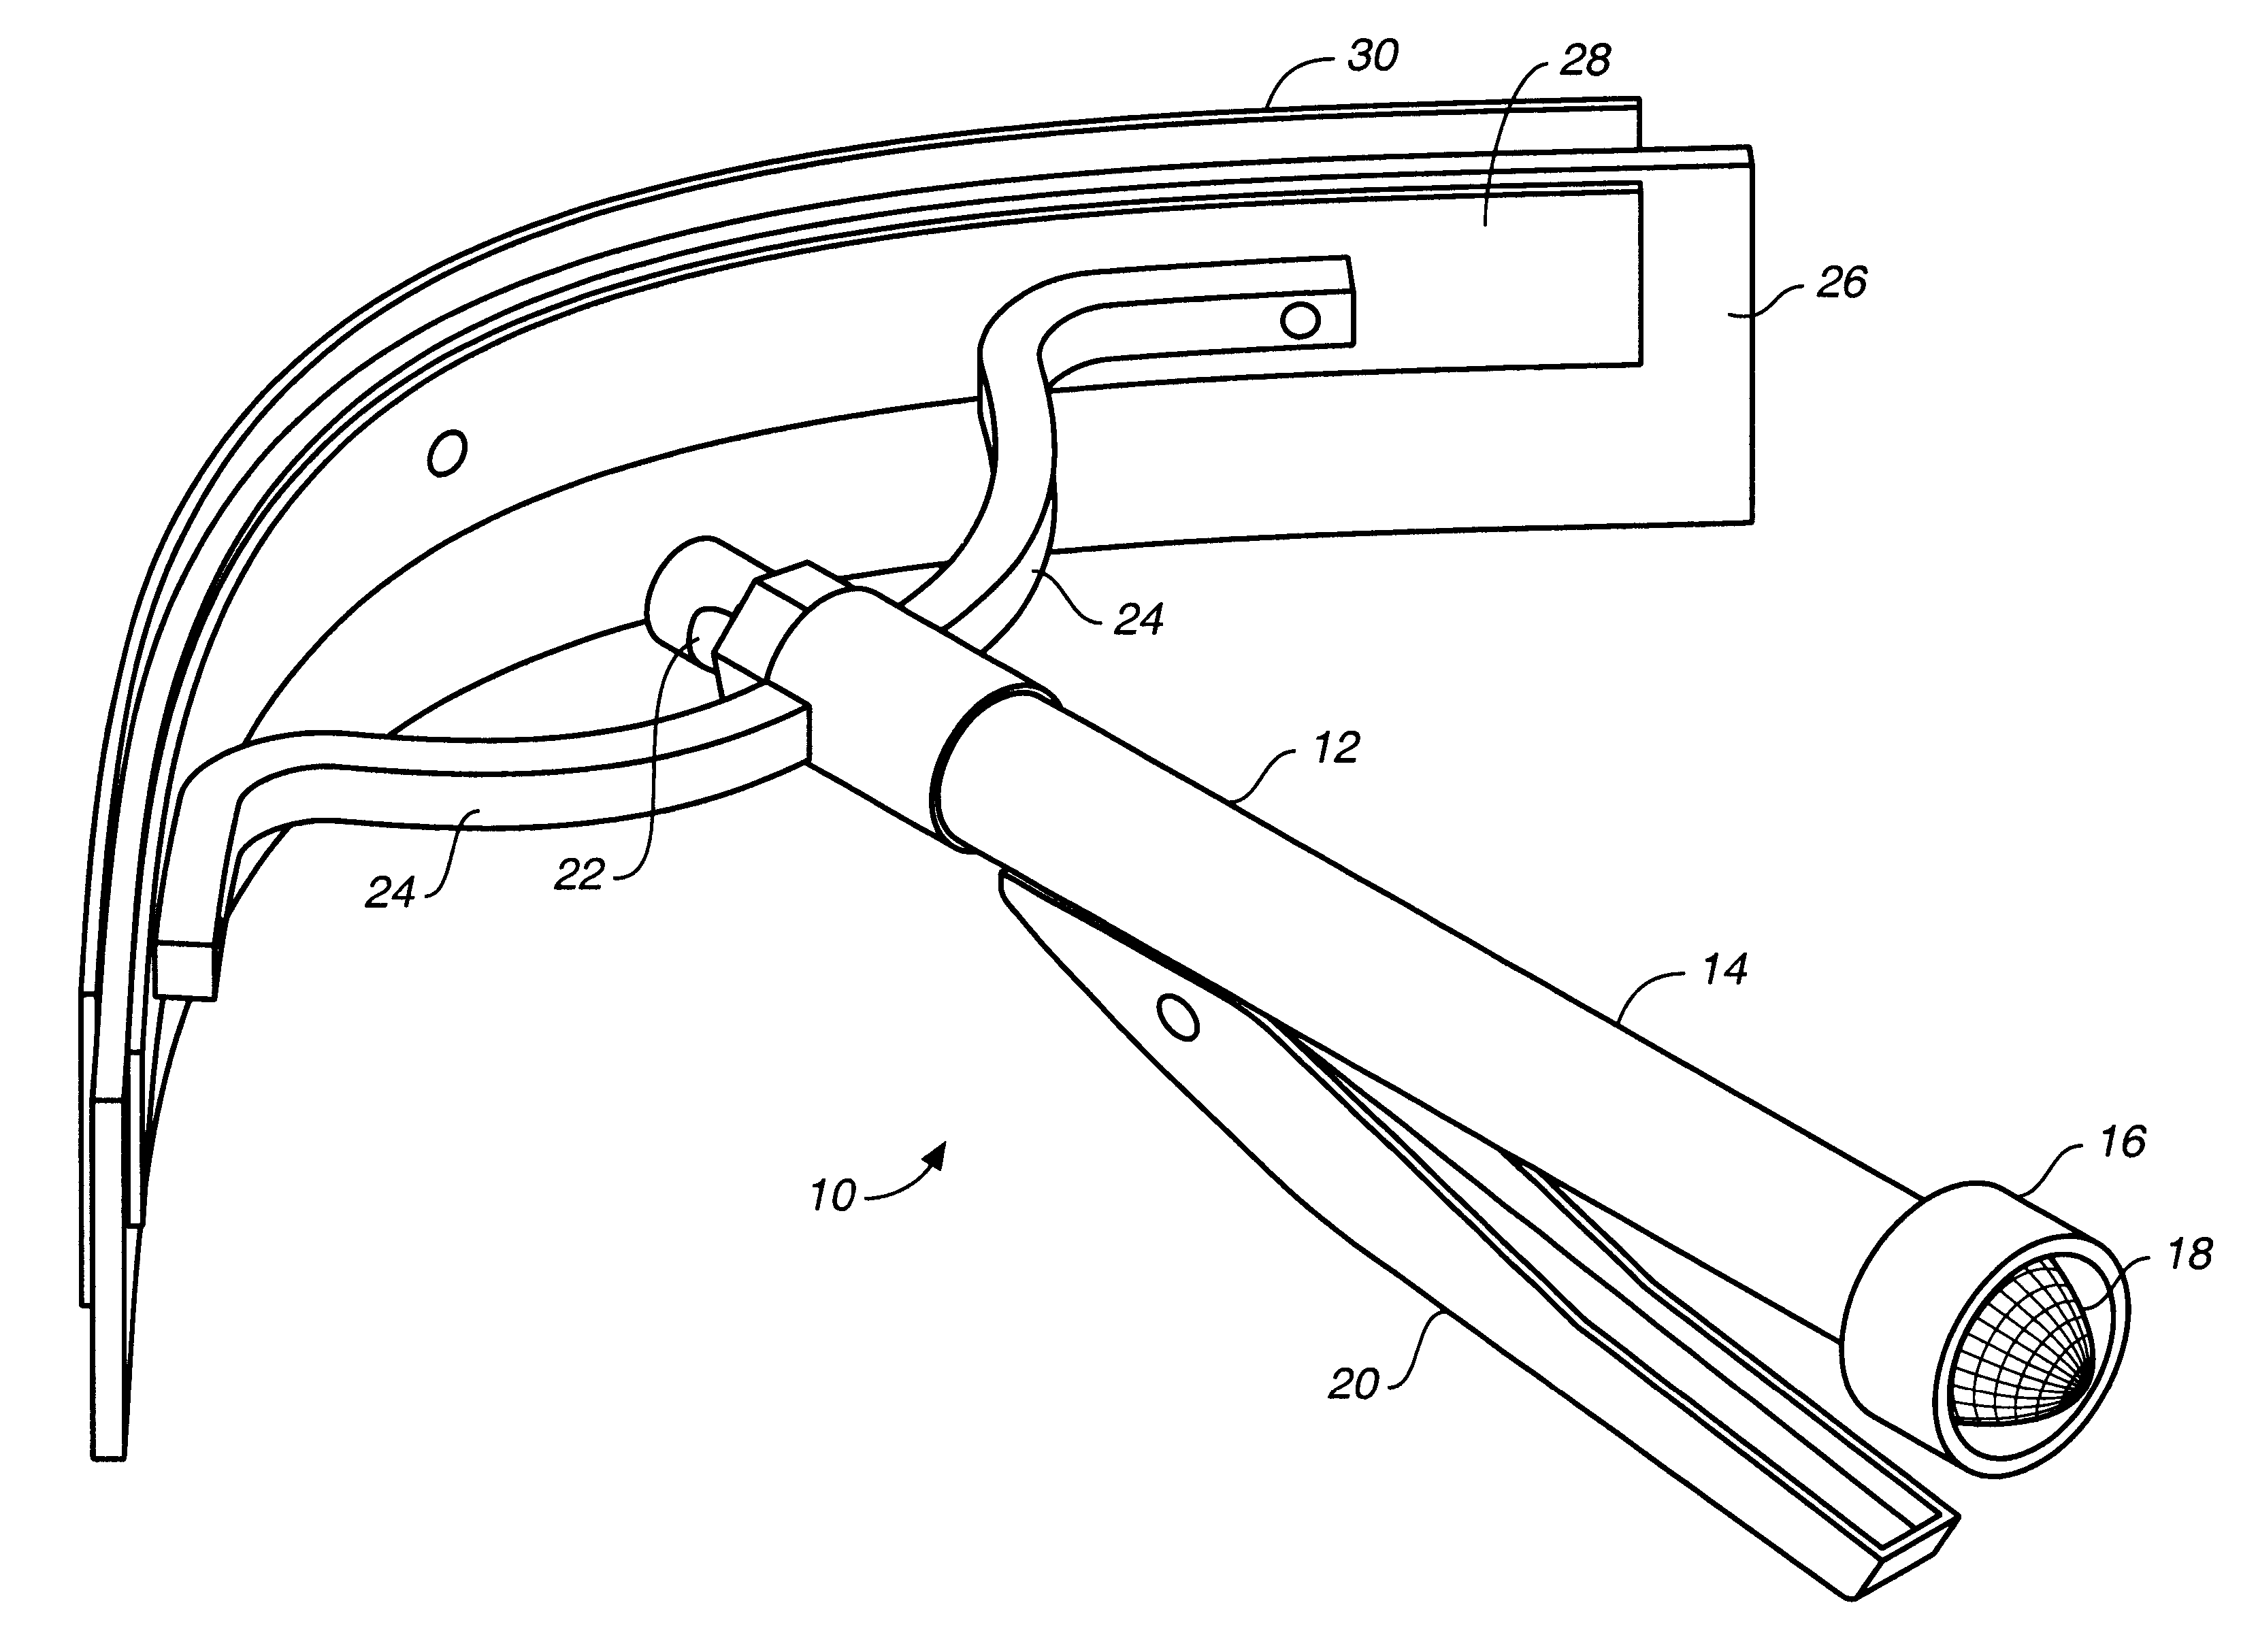 Animal grooming squeegee apparatus